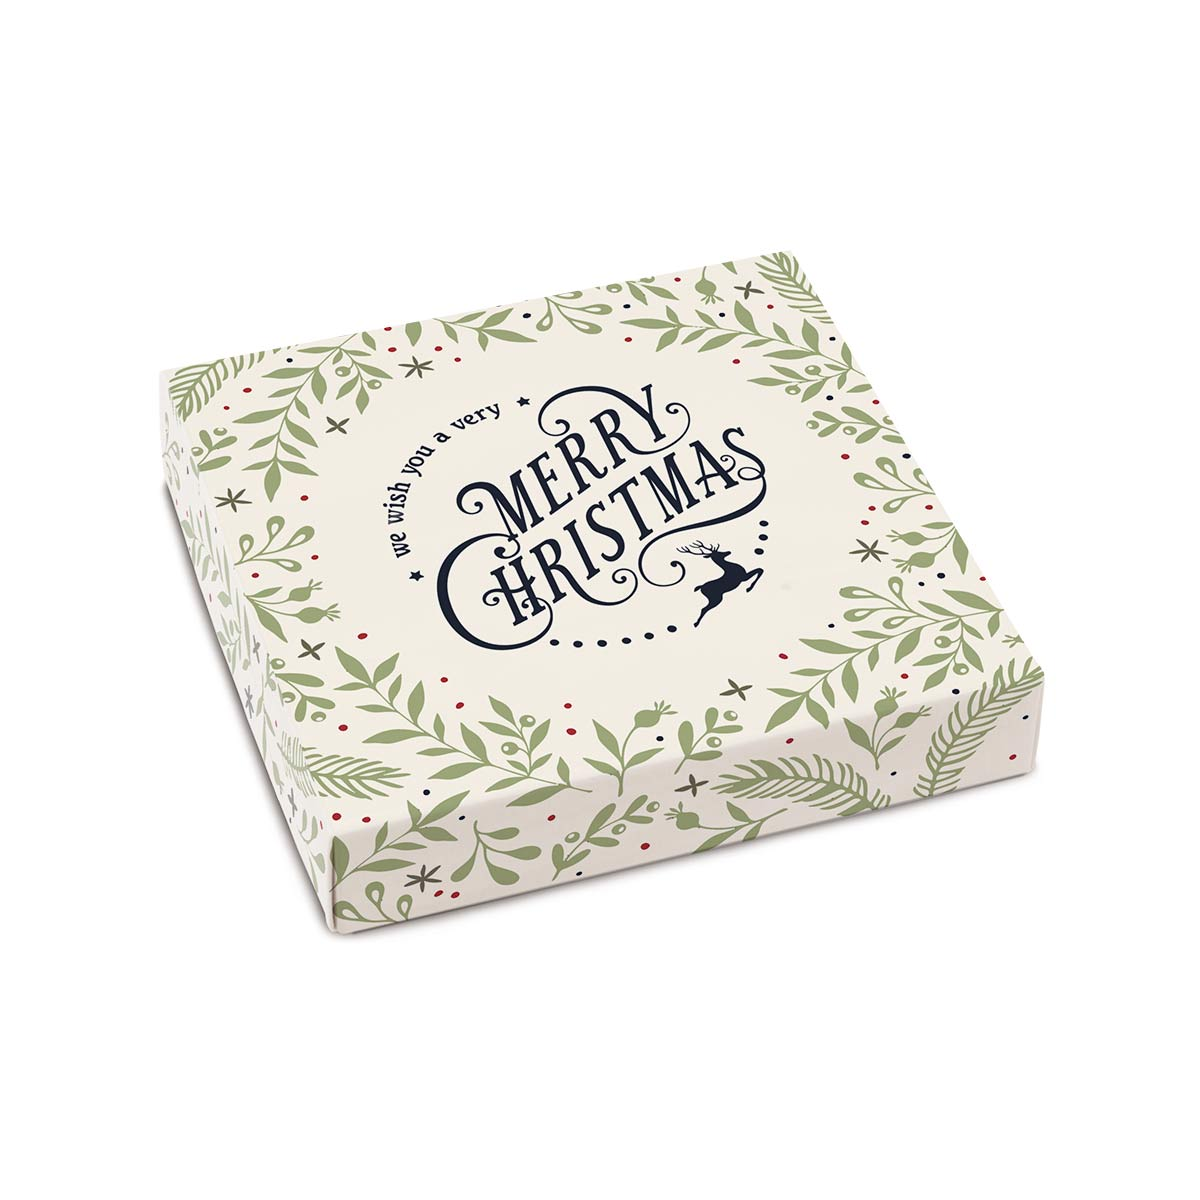 Very Merry Christmas Themed Box Cover for 16 Piece Holiday Assortment